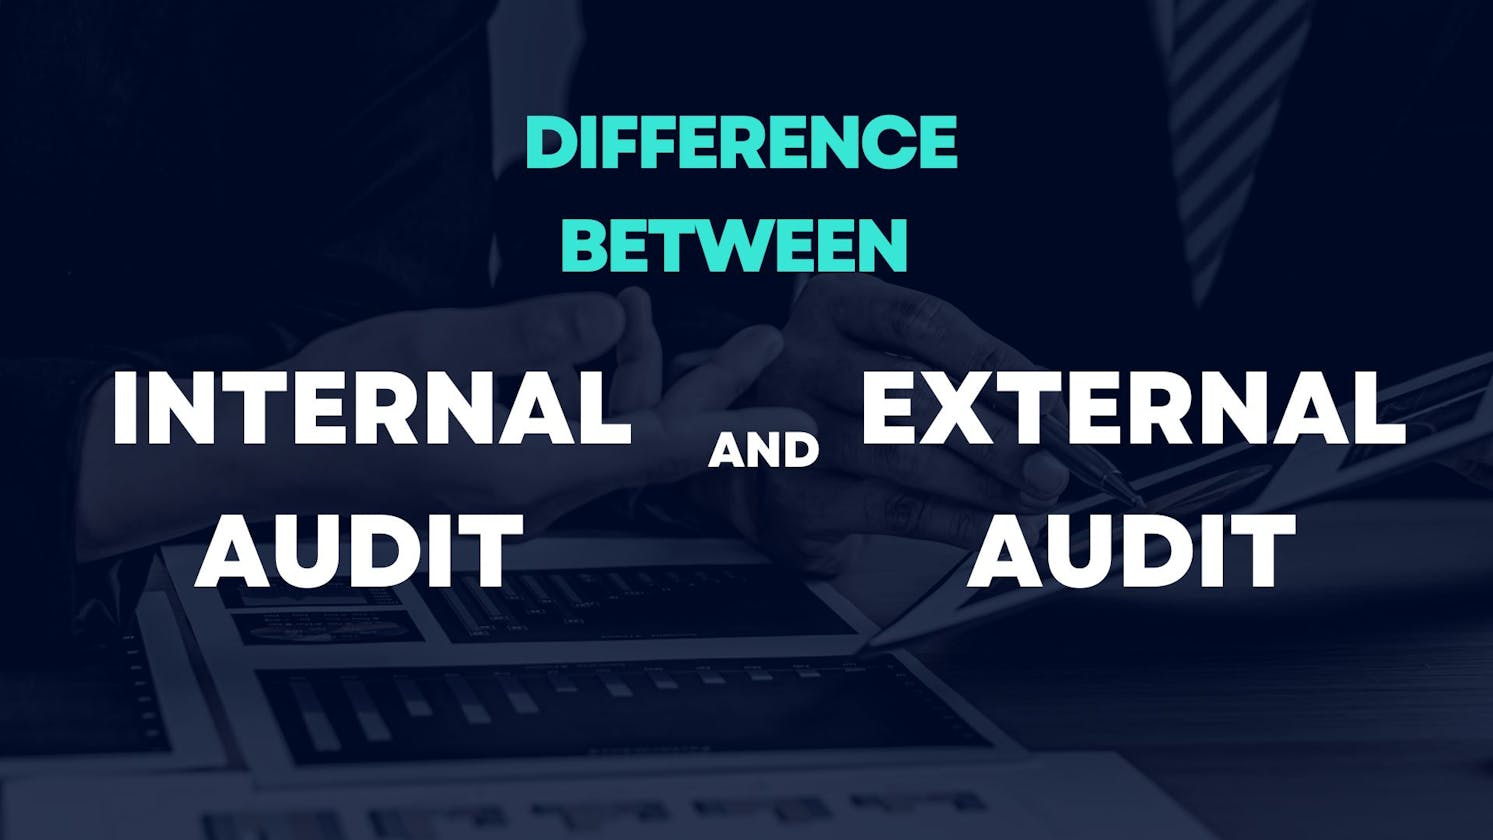 Difference between internal audit and external audit